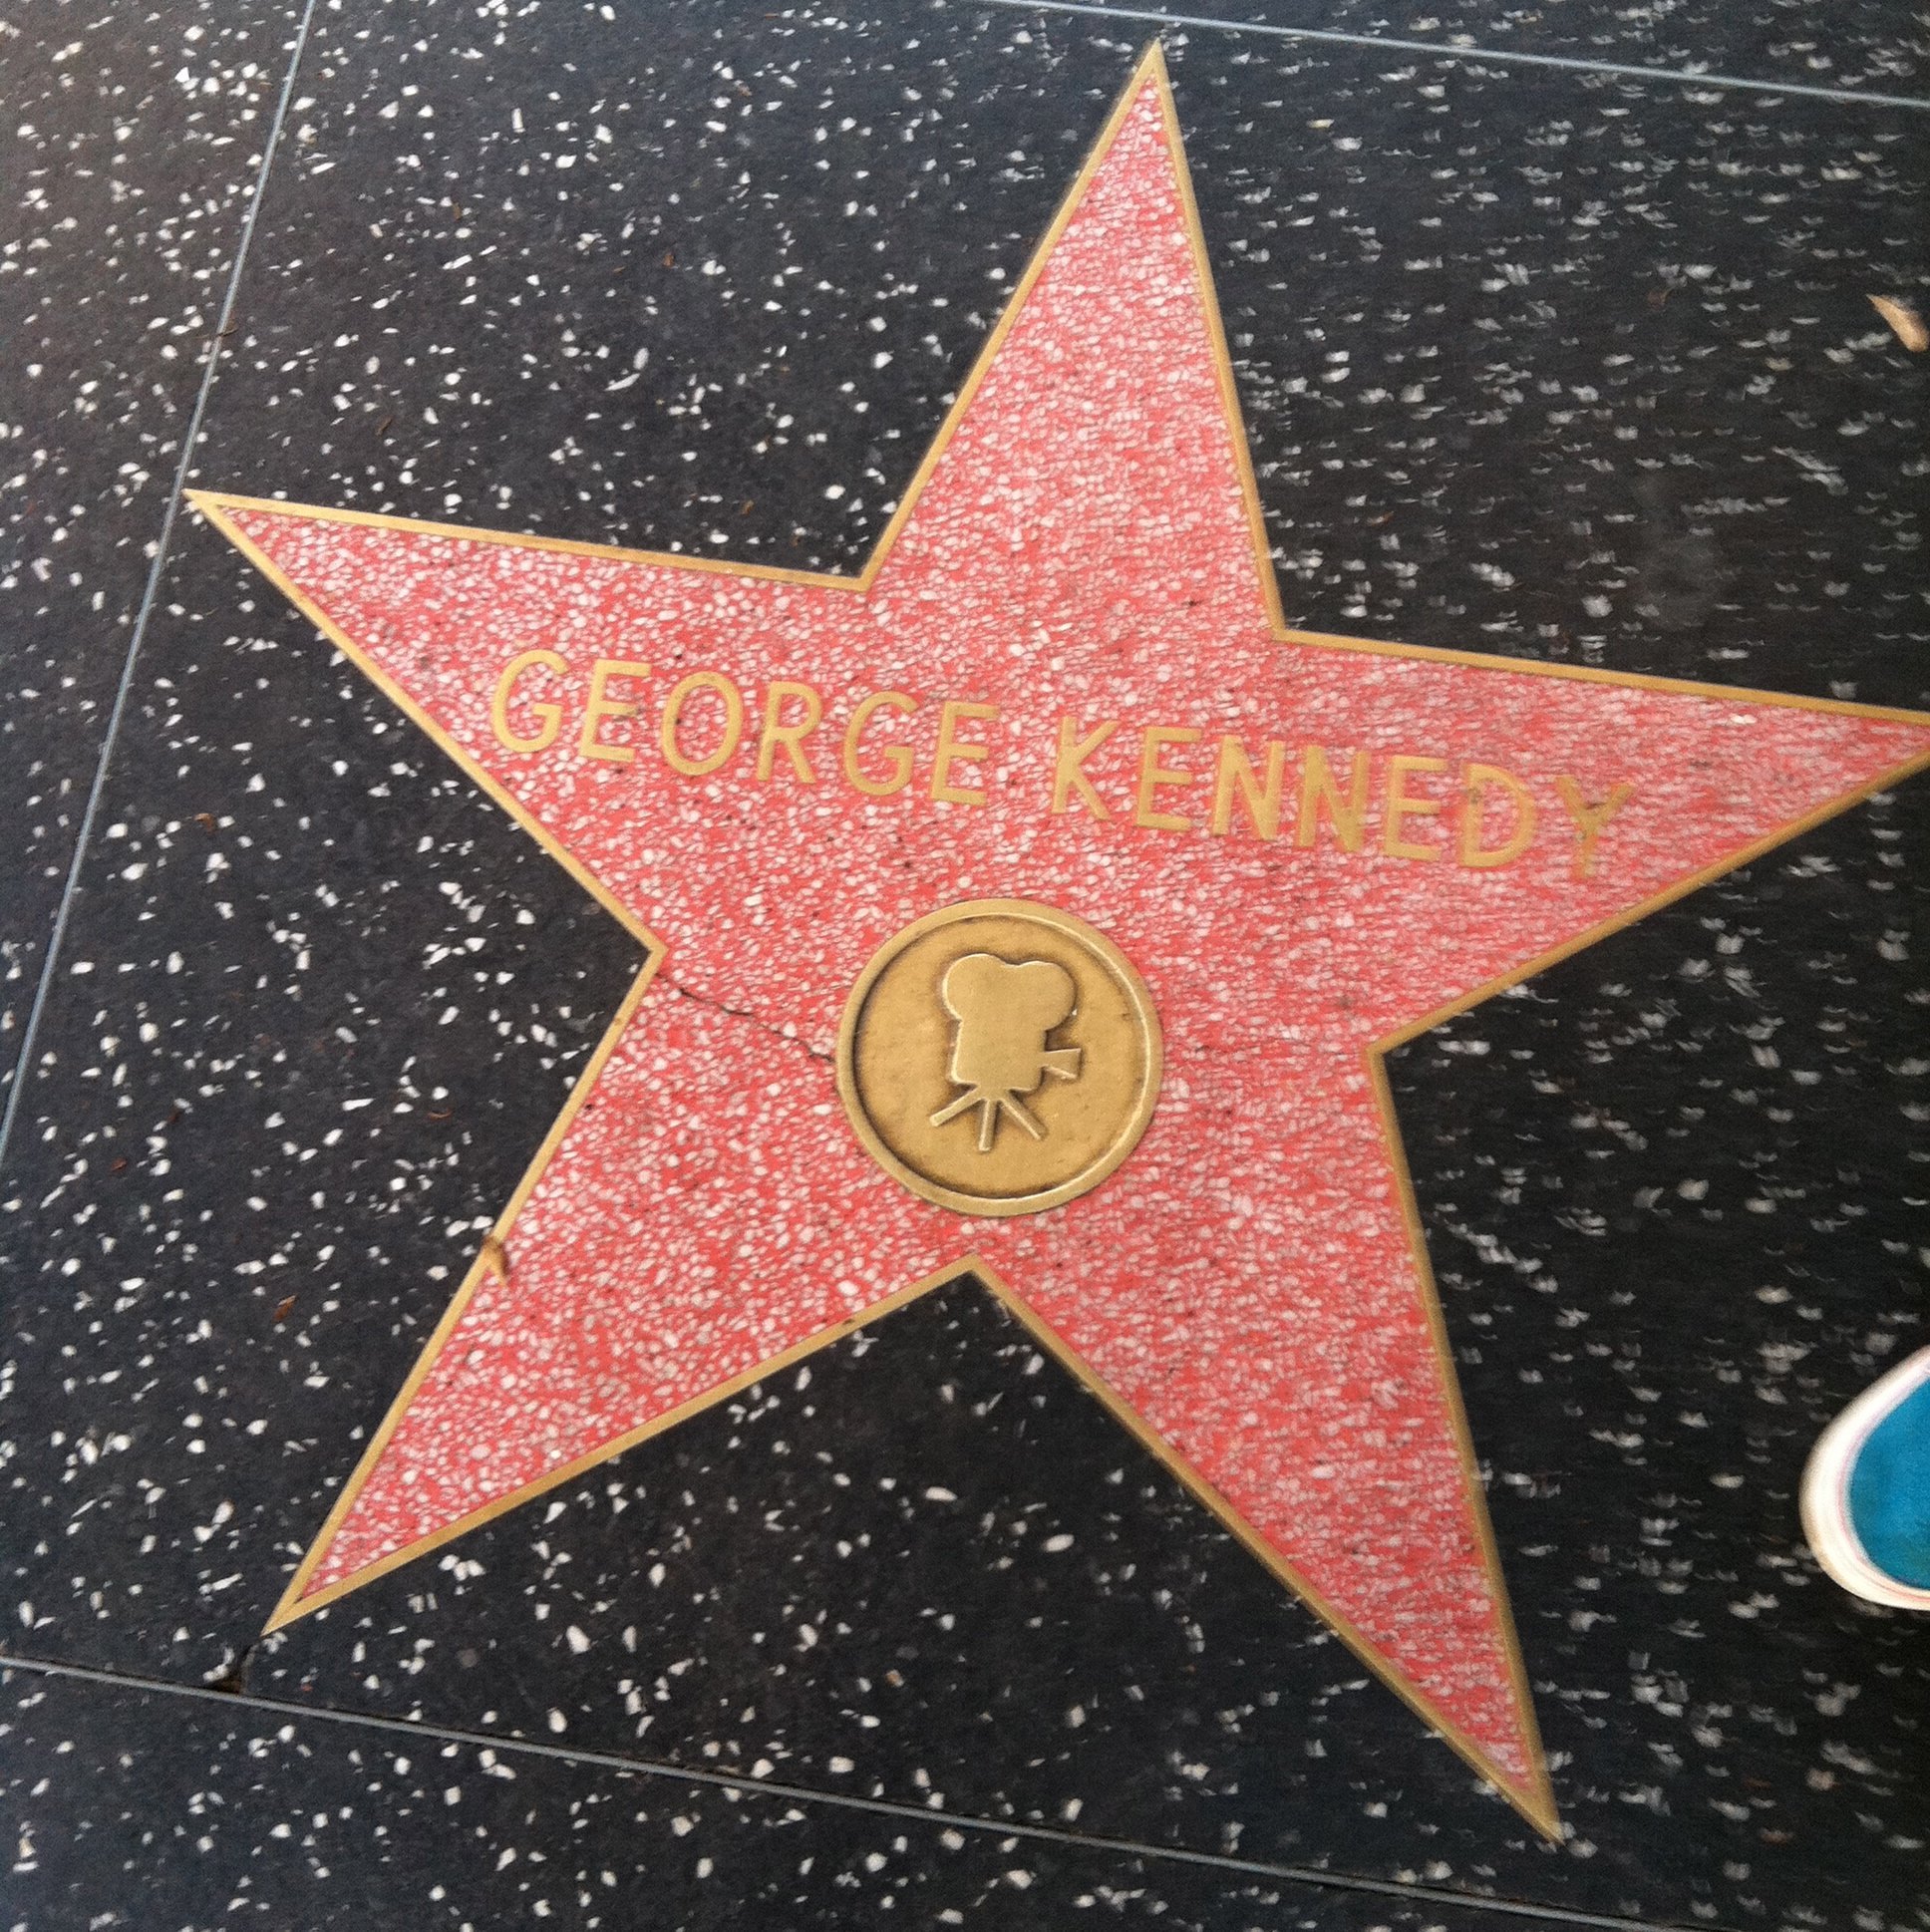 George Kennedy's star in Hollywood Walk of Fame. | Source: Wikimedia Commons